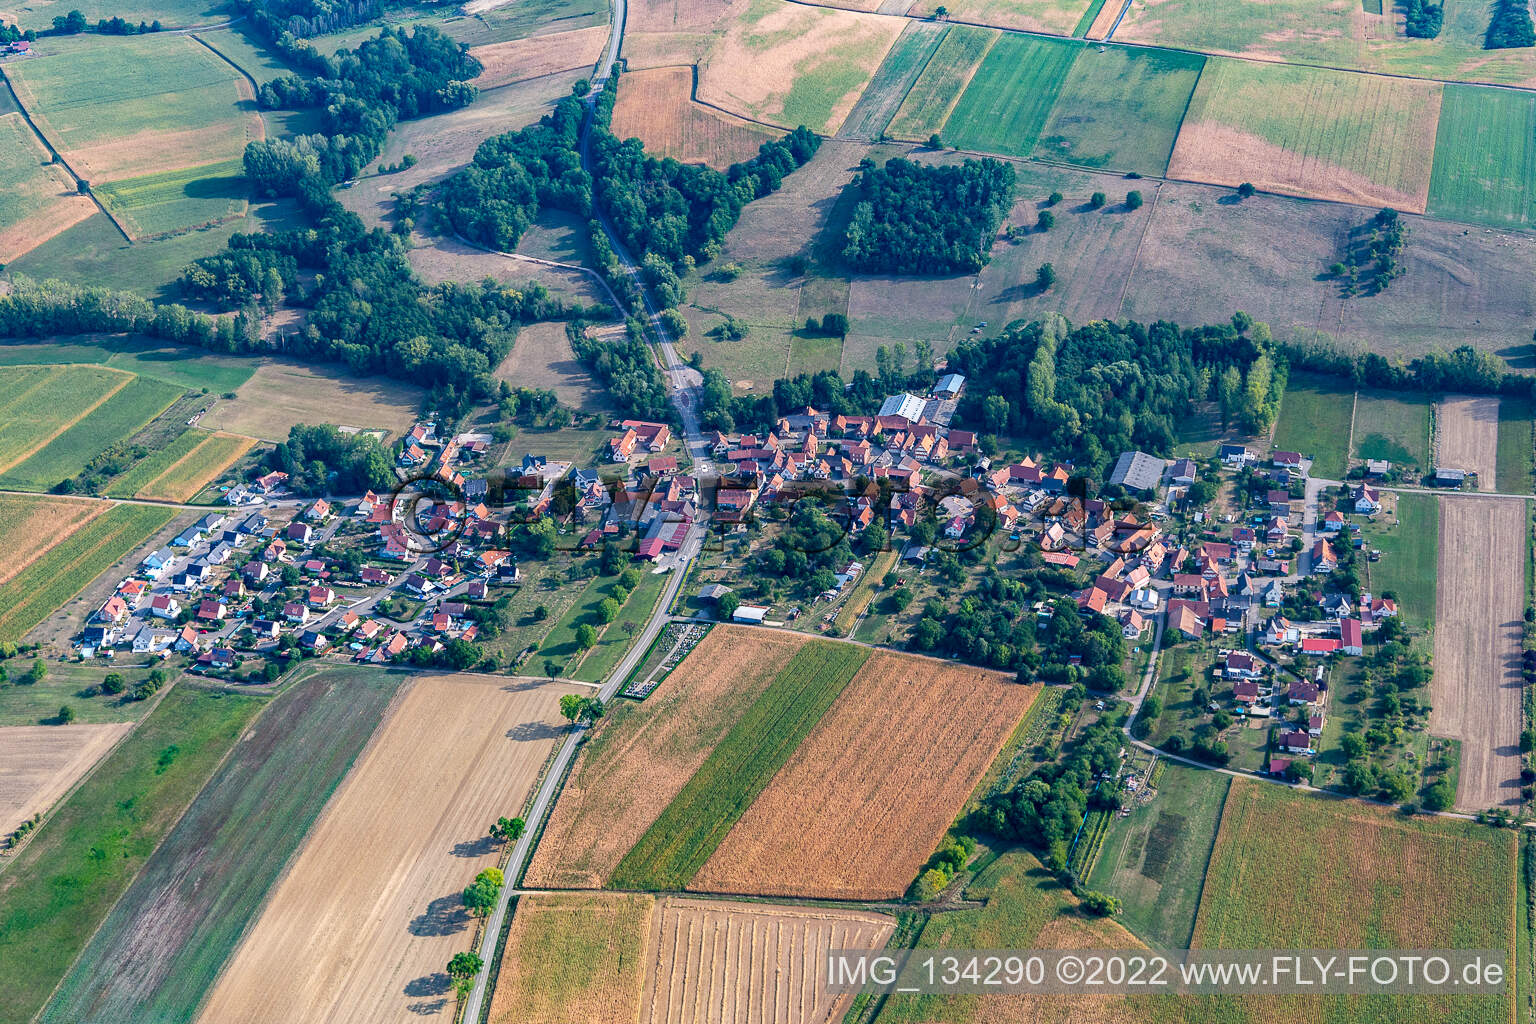 Ingolsheim in the state Bas-Rhin, France seen from above